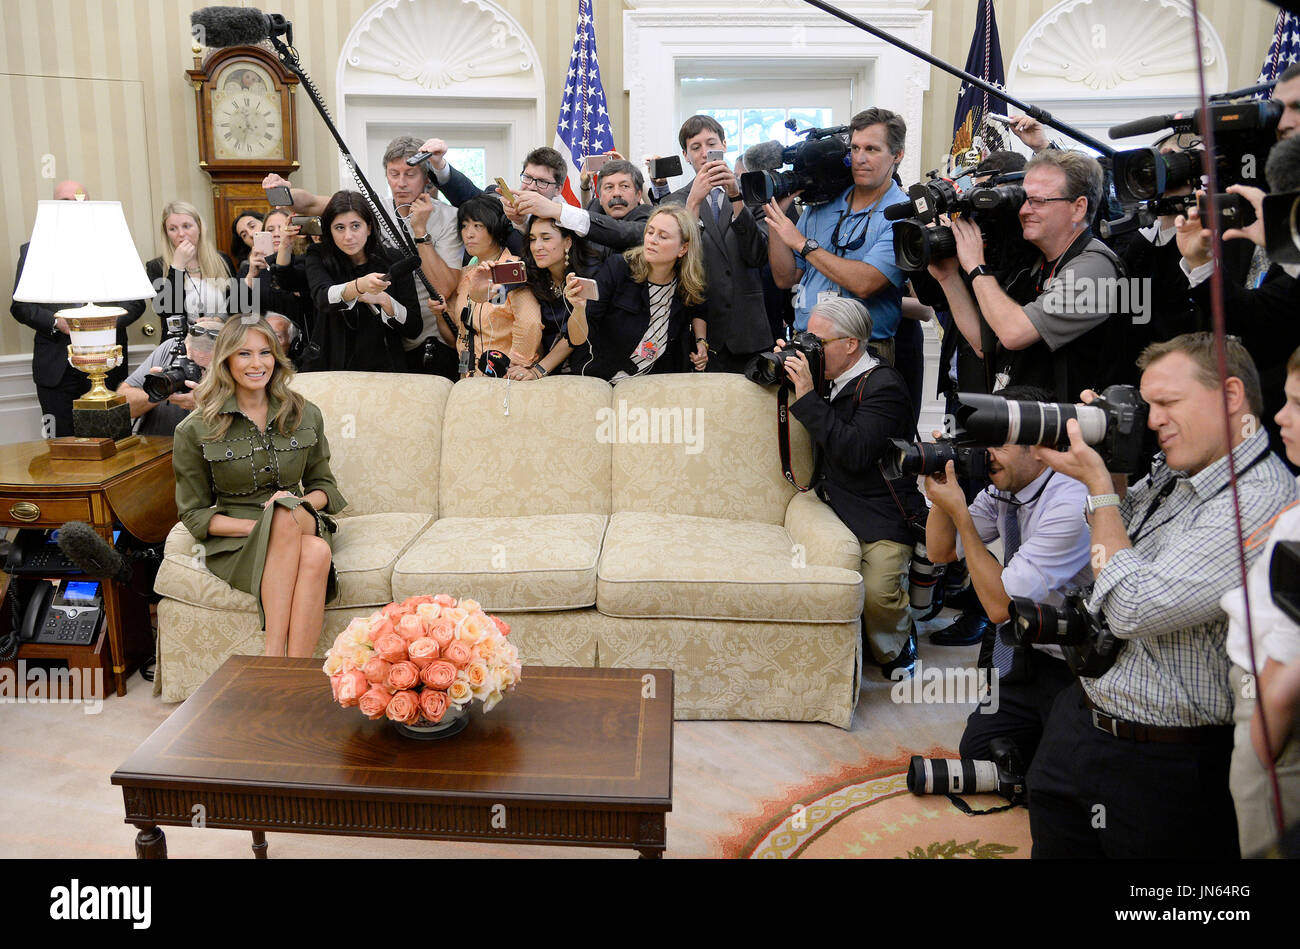 First Lady Melania Trump looks on during a meeting with President Mauricio Macri of Argentina in the Oval Office of the White House  in Washington, DC, on April 27, 2017.  Credit: Olivier Douliery / Pool via CNP Stock Photo